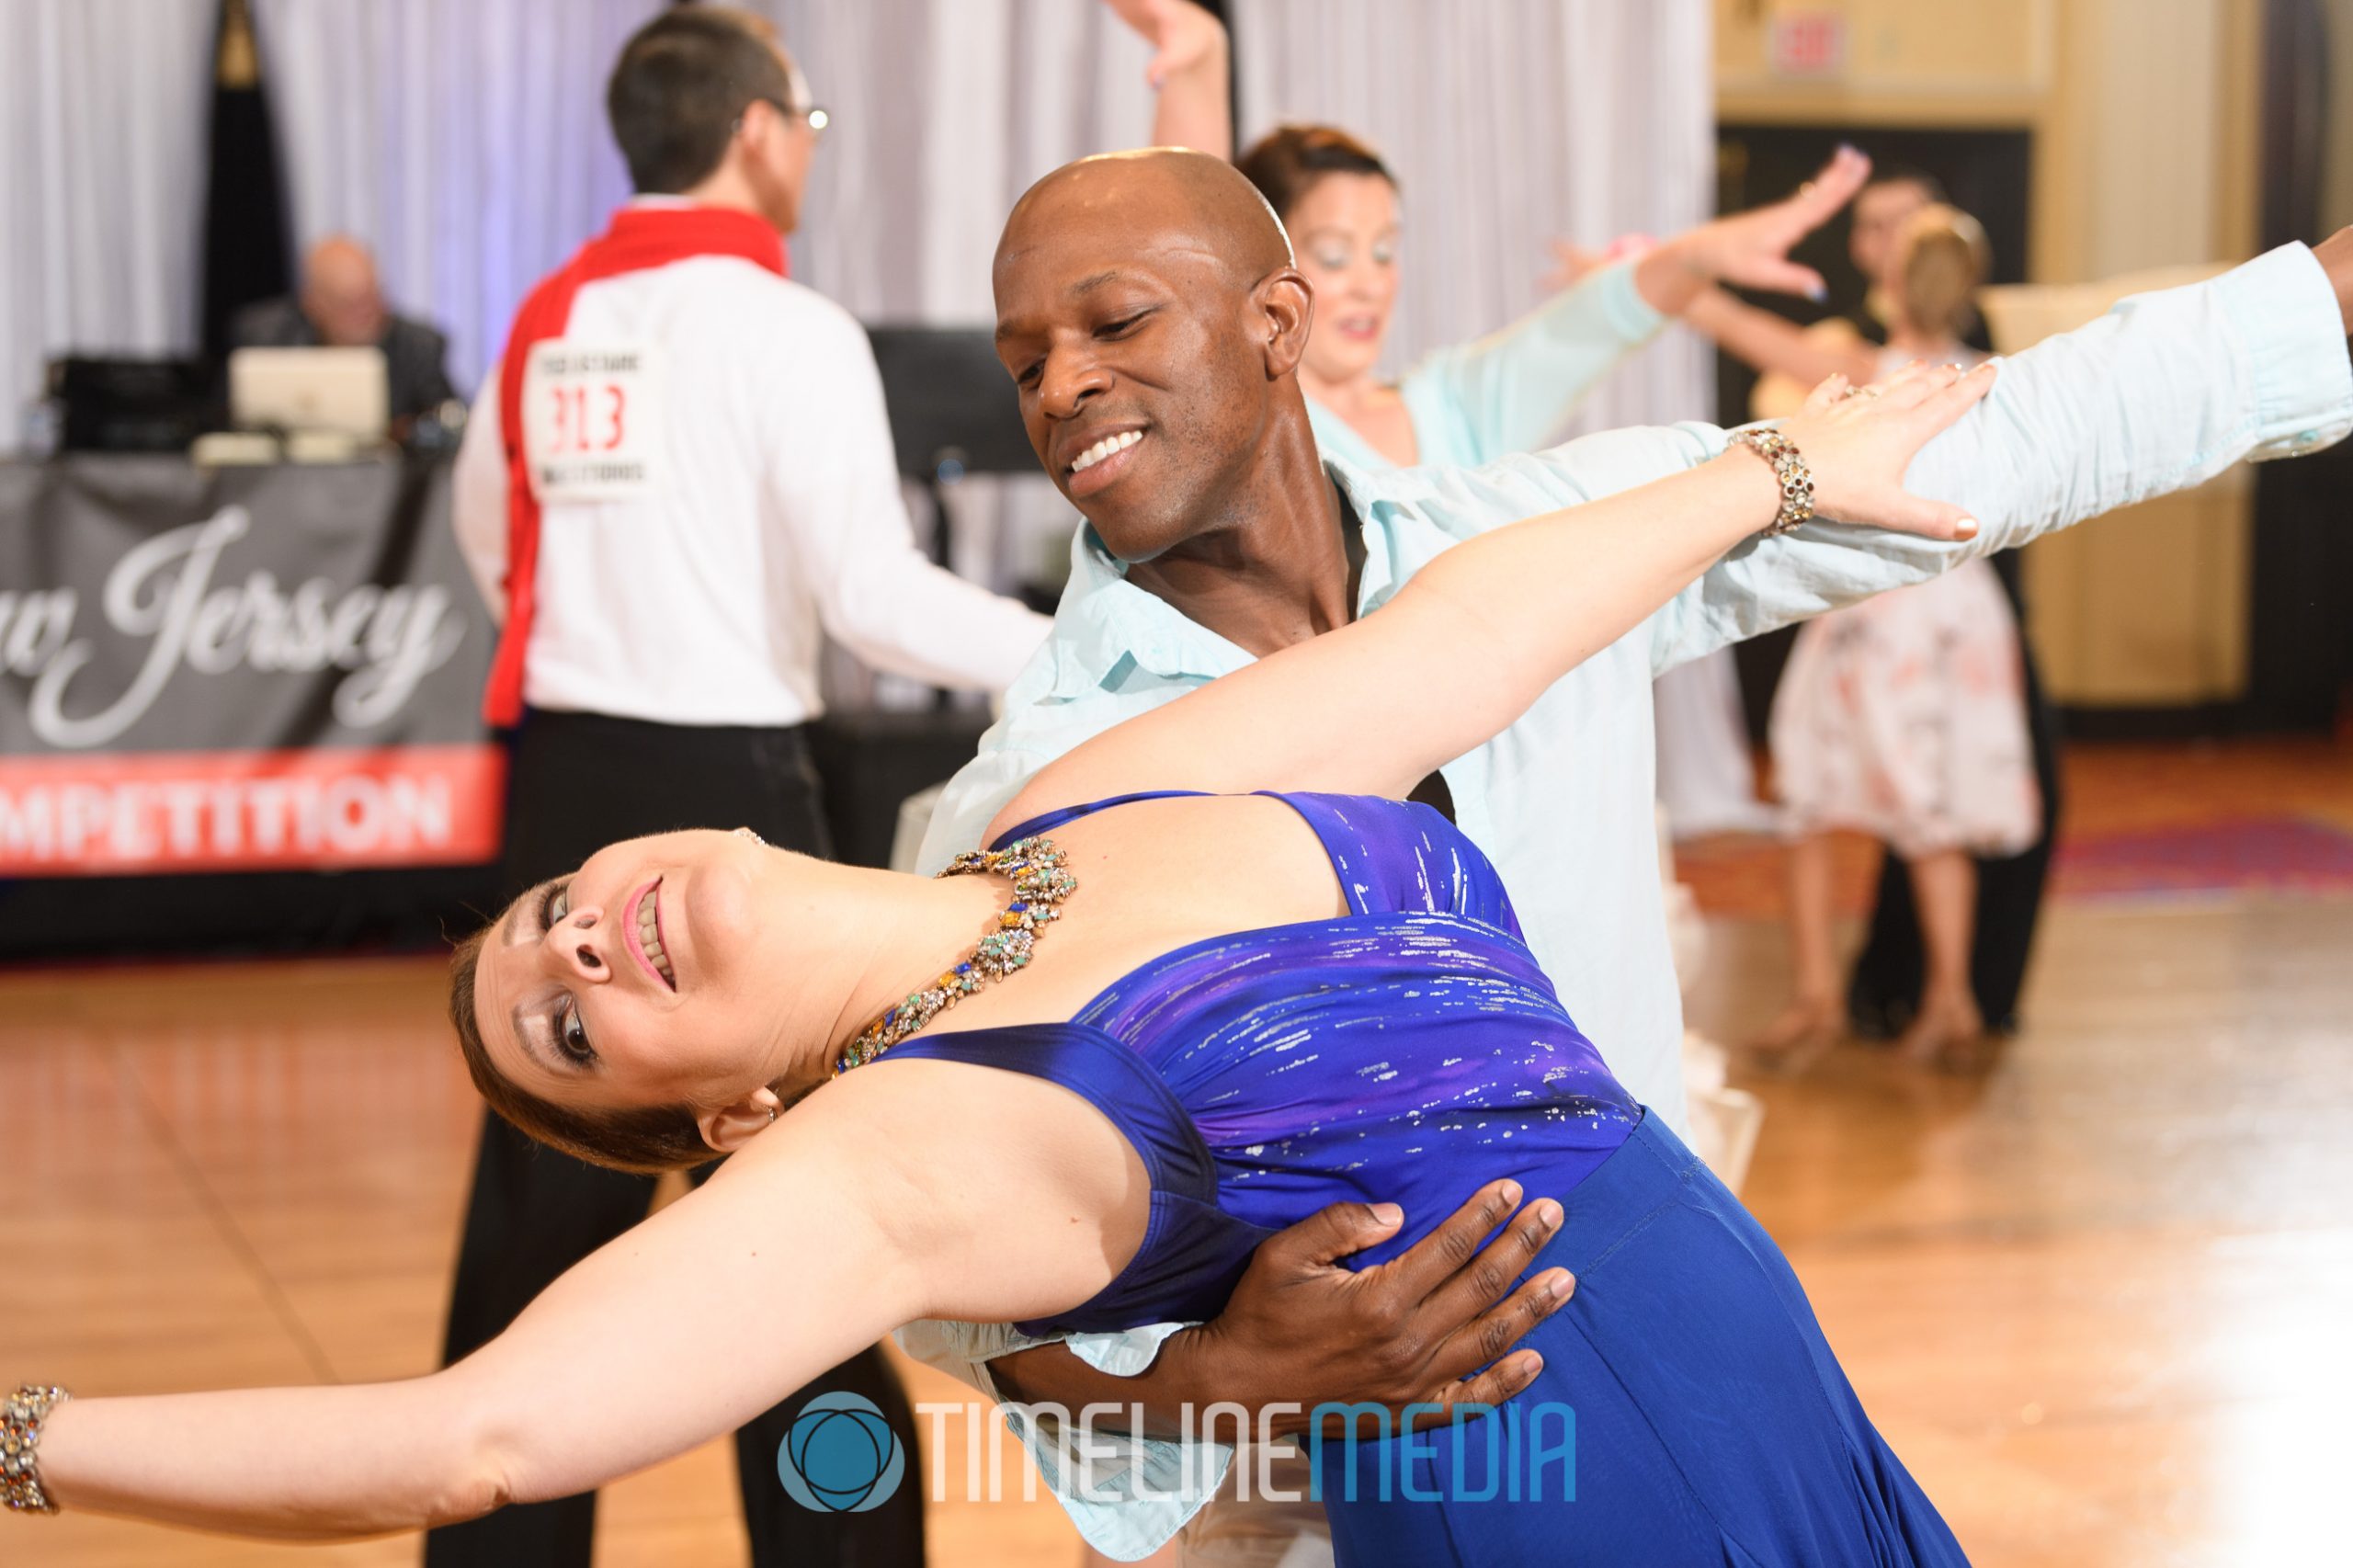 Dancers competing at the NJ Fred Astaire Team Match ©TimeLine Media